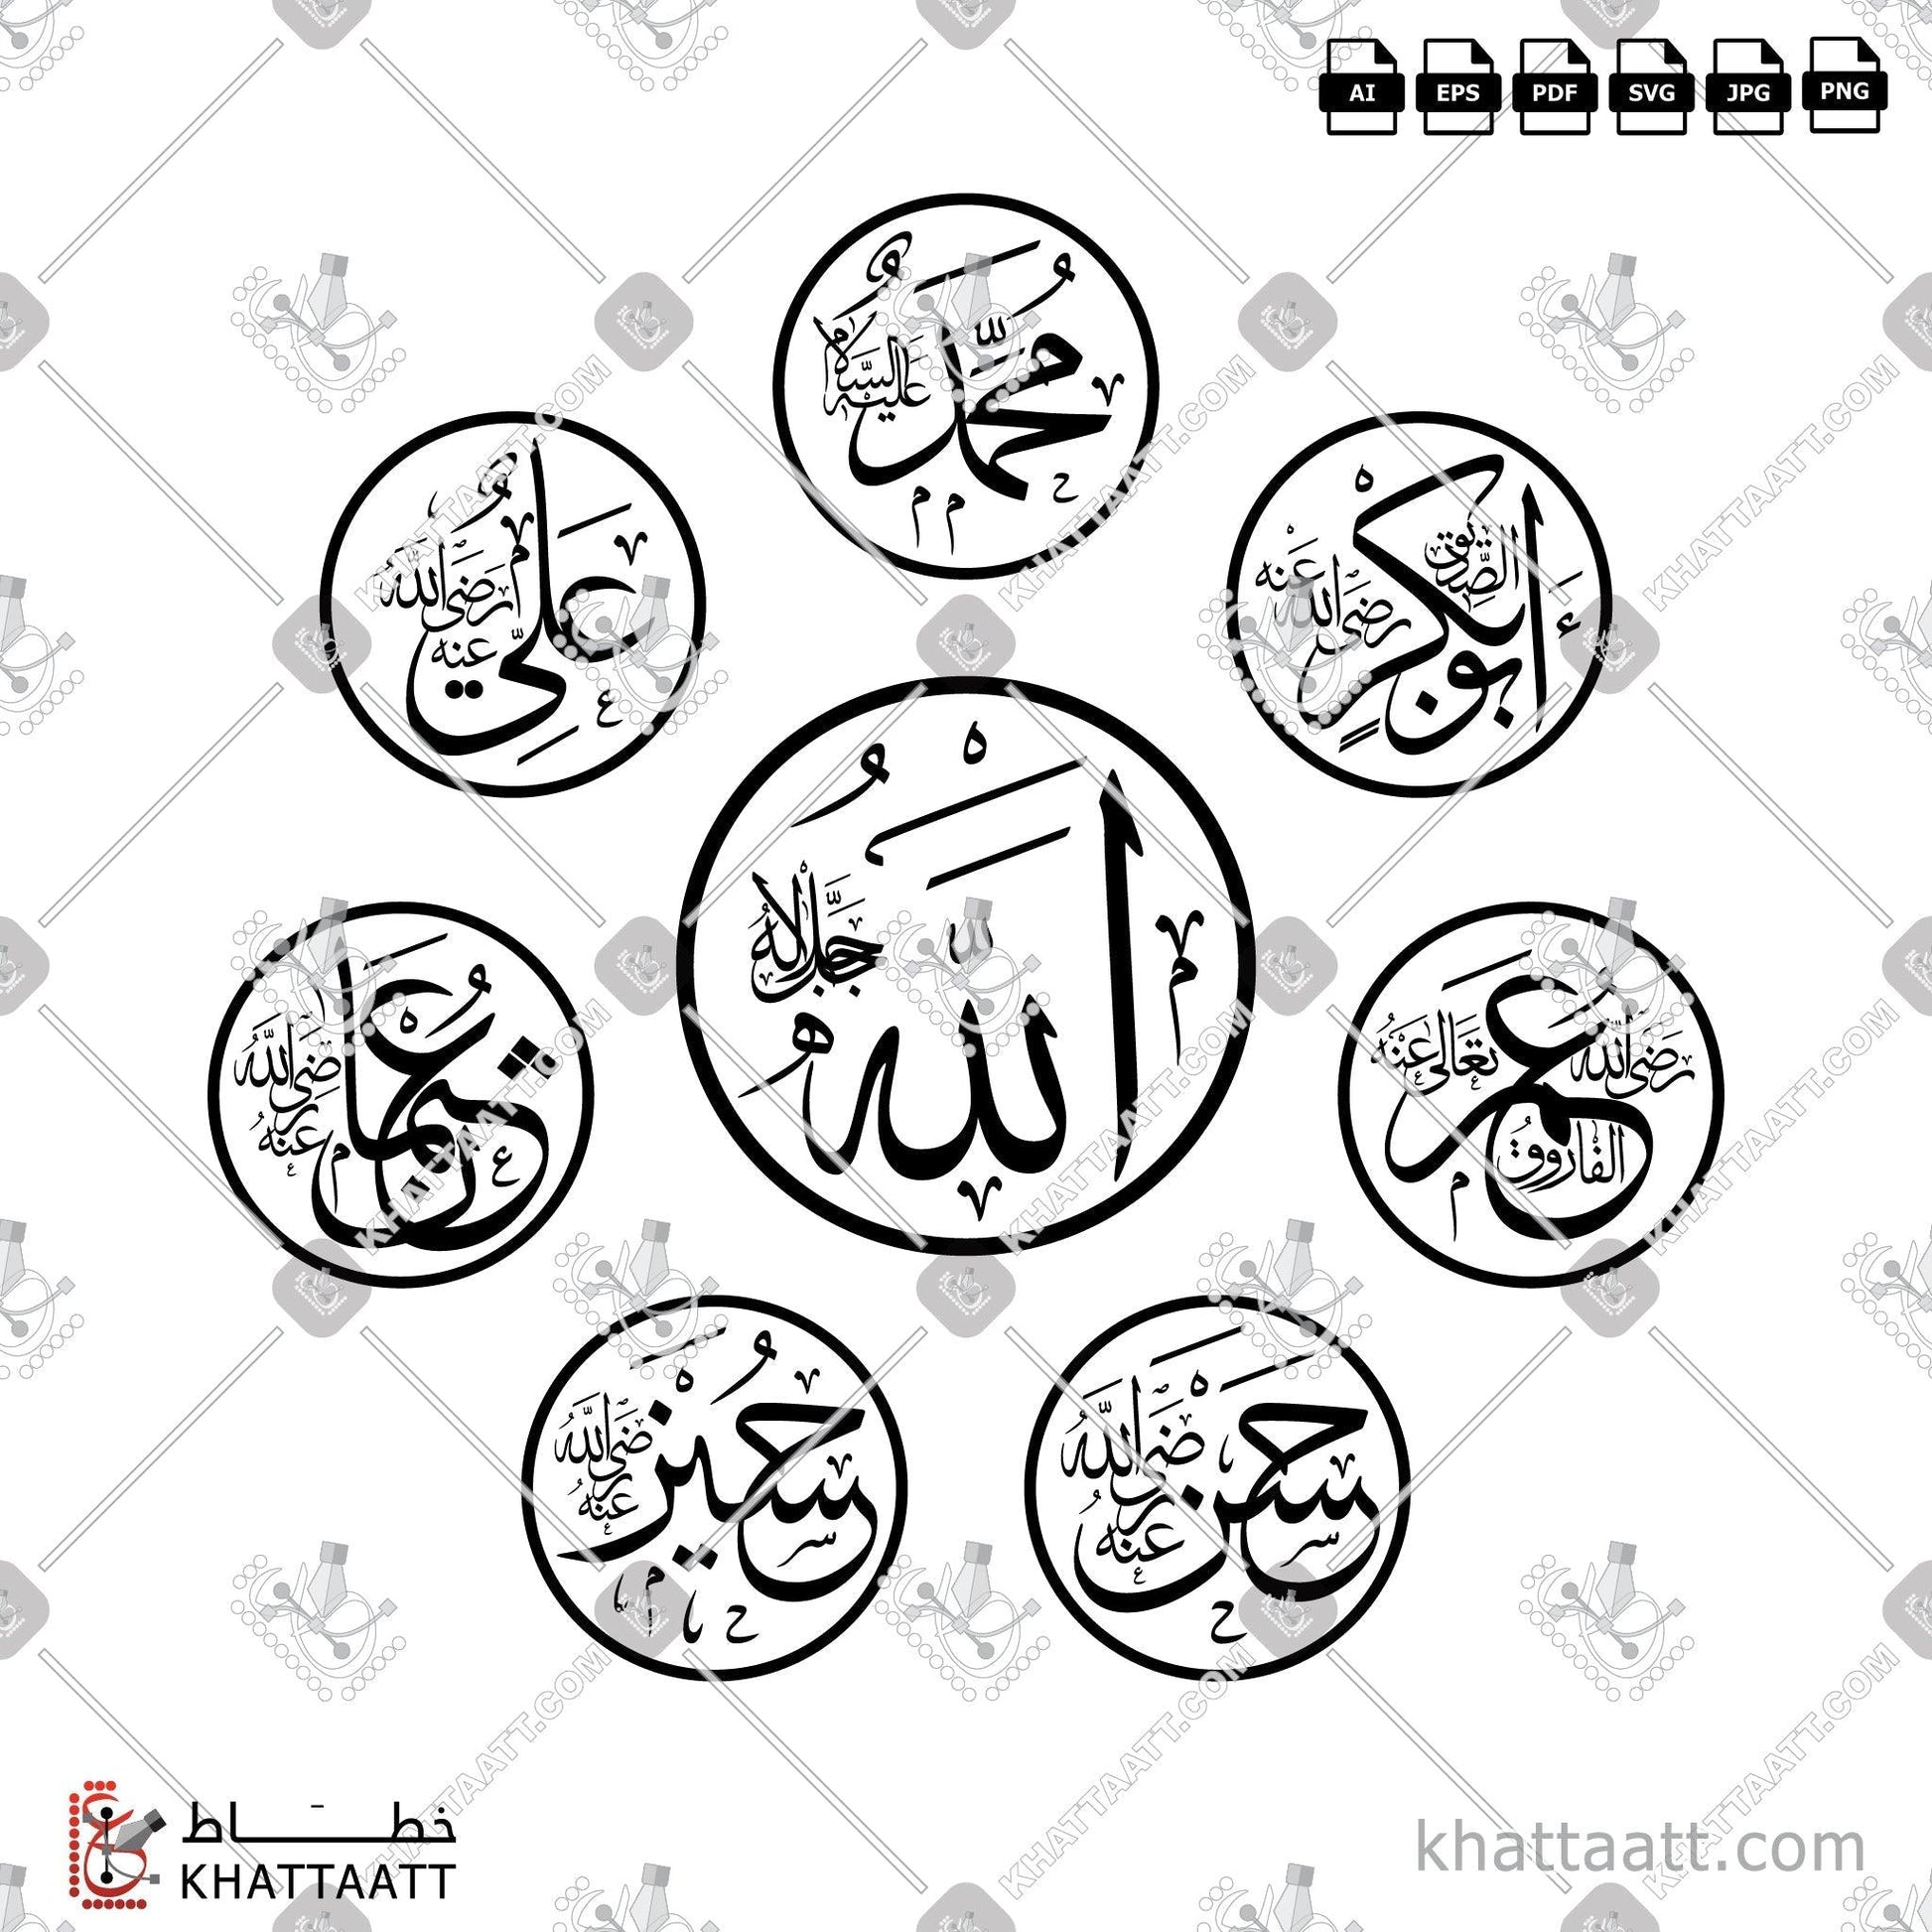 Download Arabic Calligraphy of Hagia Sophia Mosque Calligraphy Set in Thuluth - خط الثلث in vector and .png